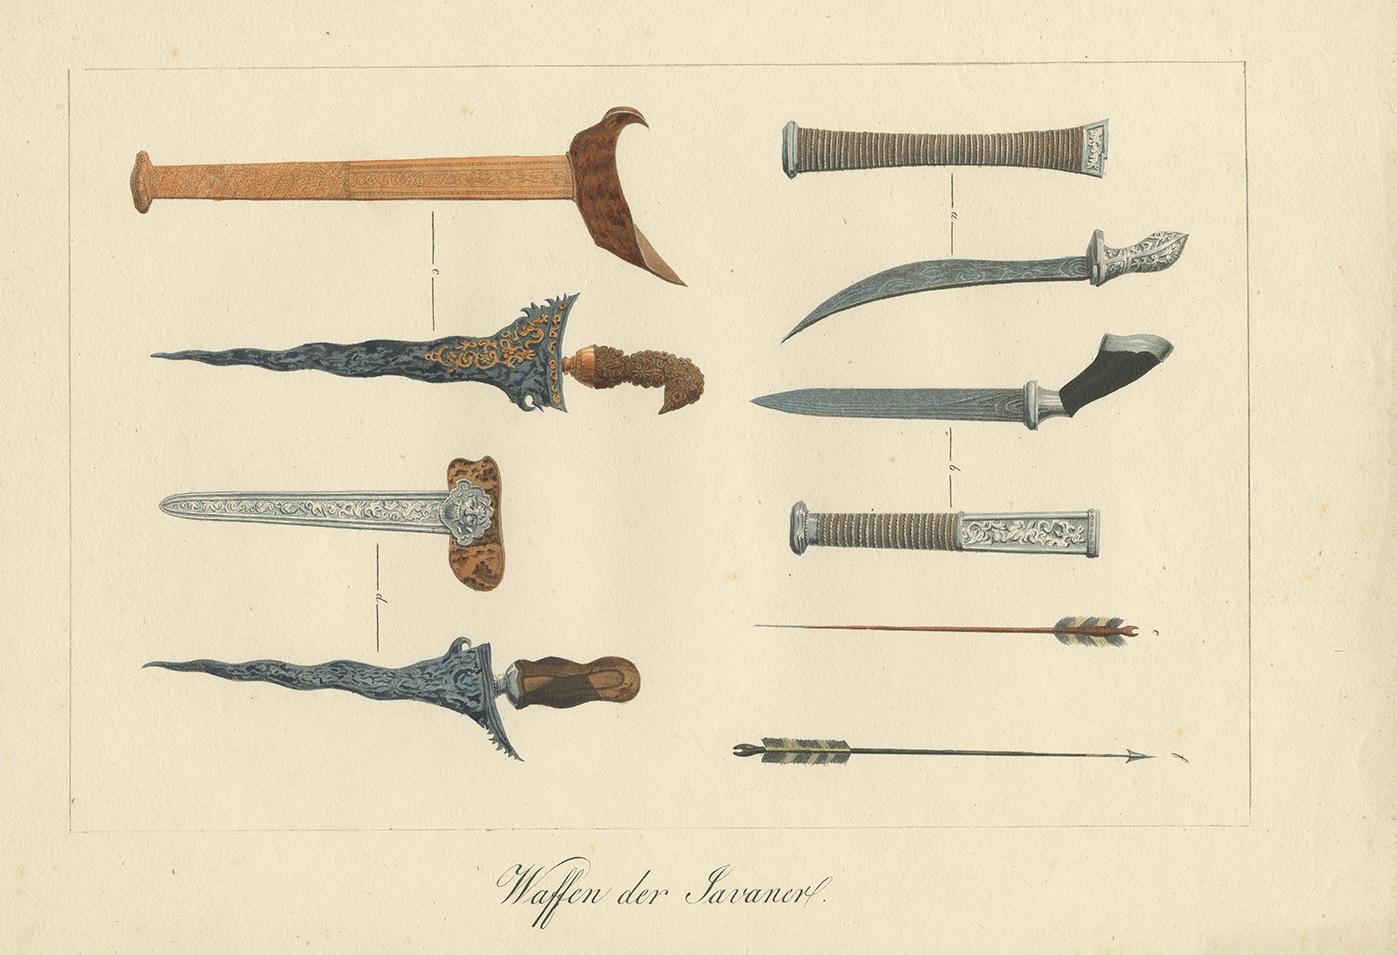 1830 weapons